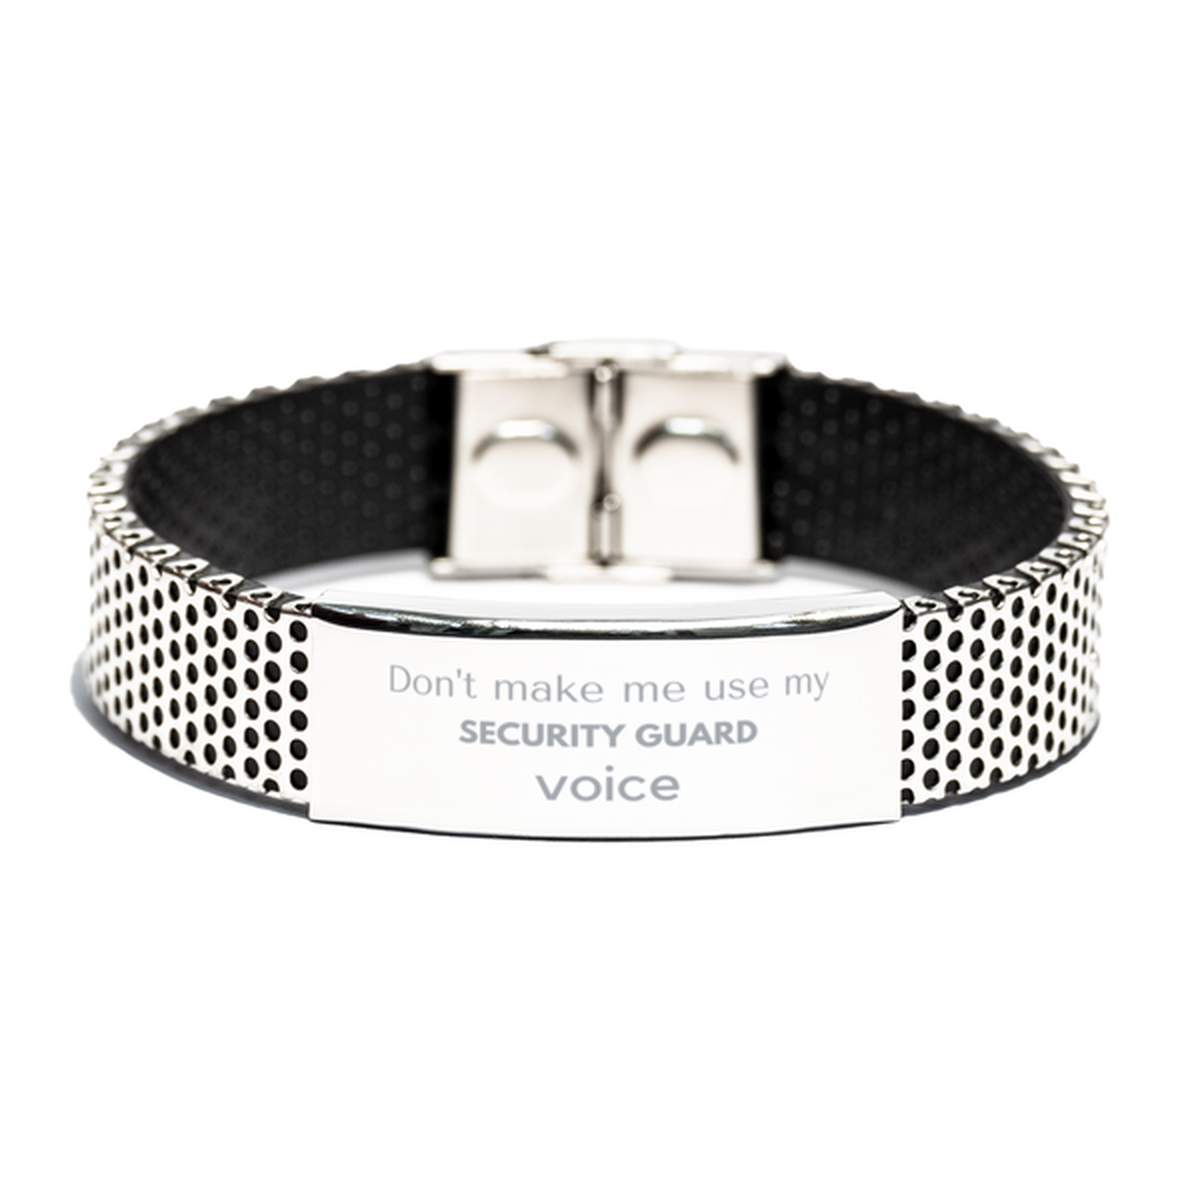 Don't make me use my Security Guard voice, Sarcasm Security Guard Gifts, Christmas Security Guard Stainless Steel Bracelet Birthday Unique Gifts For Security Guard Coworkers, Men, Women, Colleague, Friends